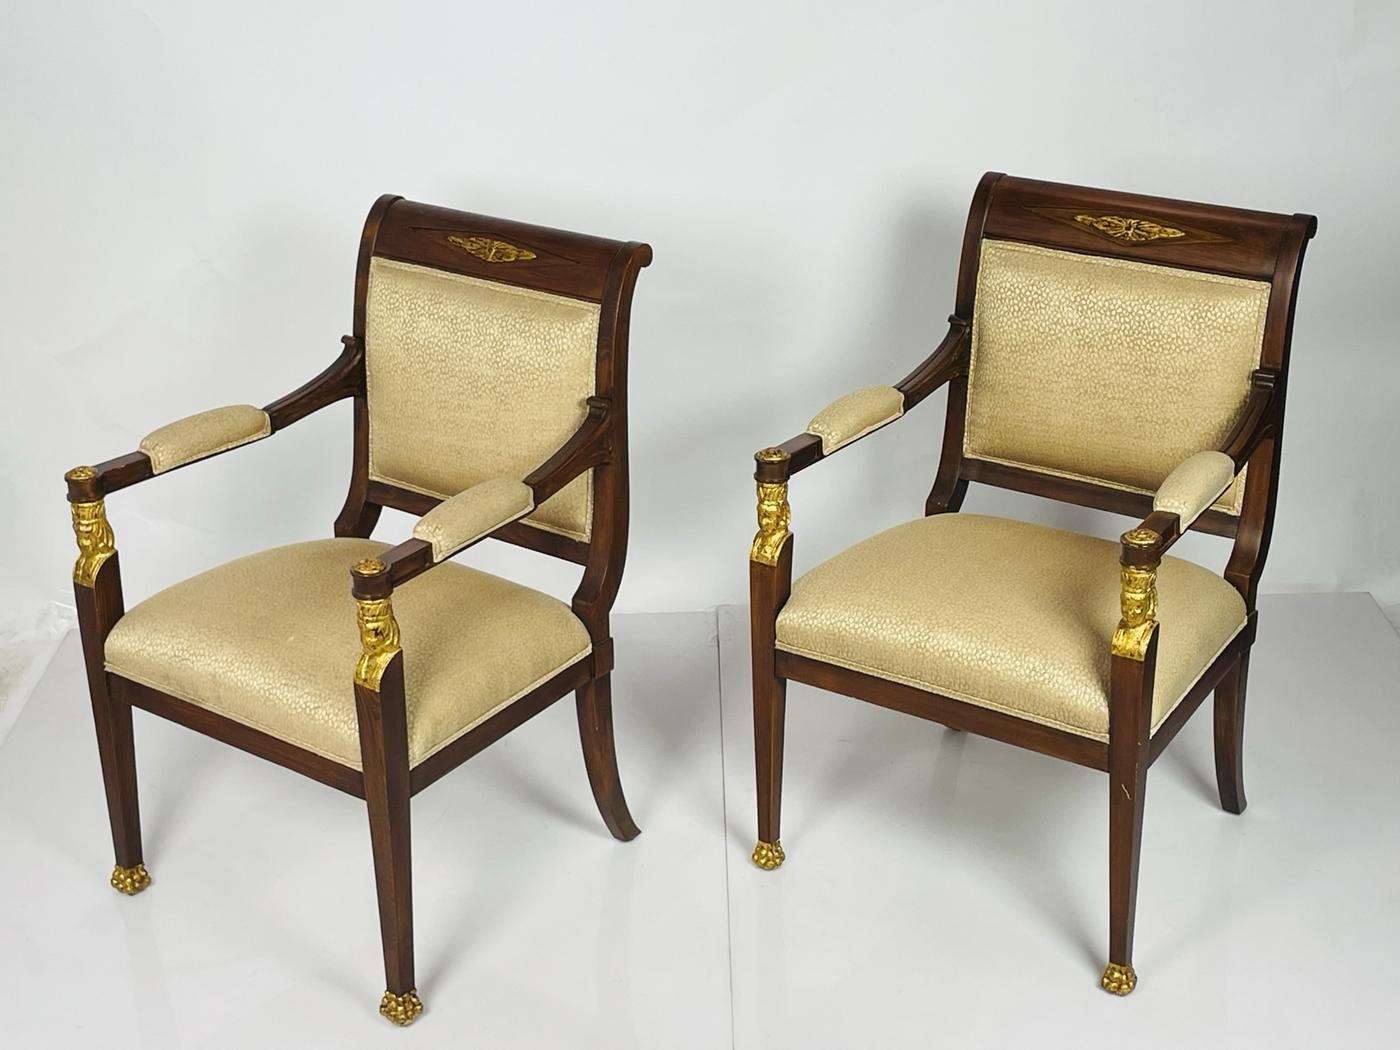 French Empire style Mahogany Armchairs Giltwood im Zustand „Gut“ im Angebot in Los Angeles, CA